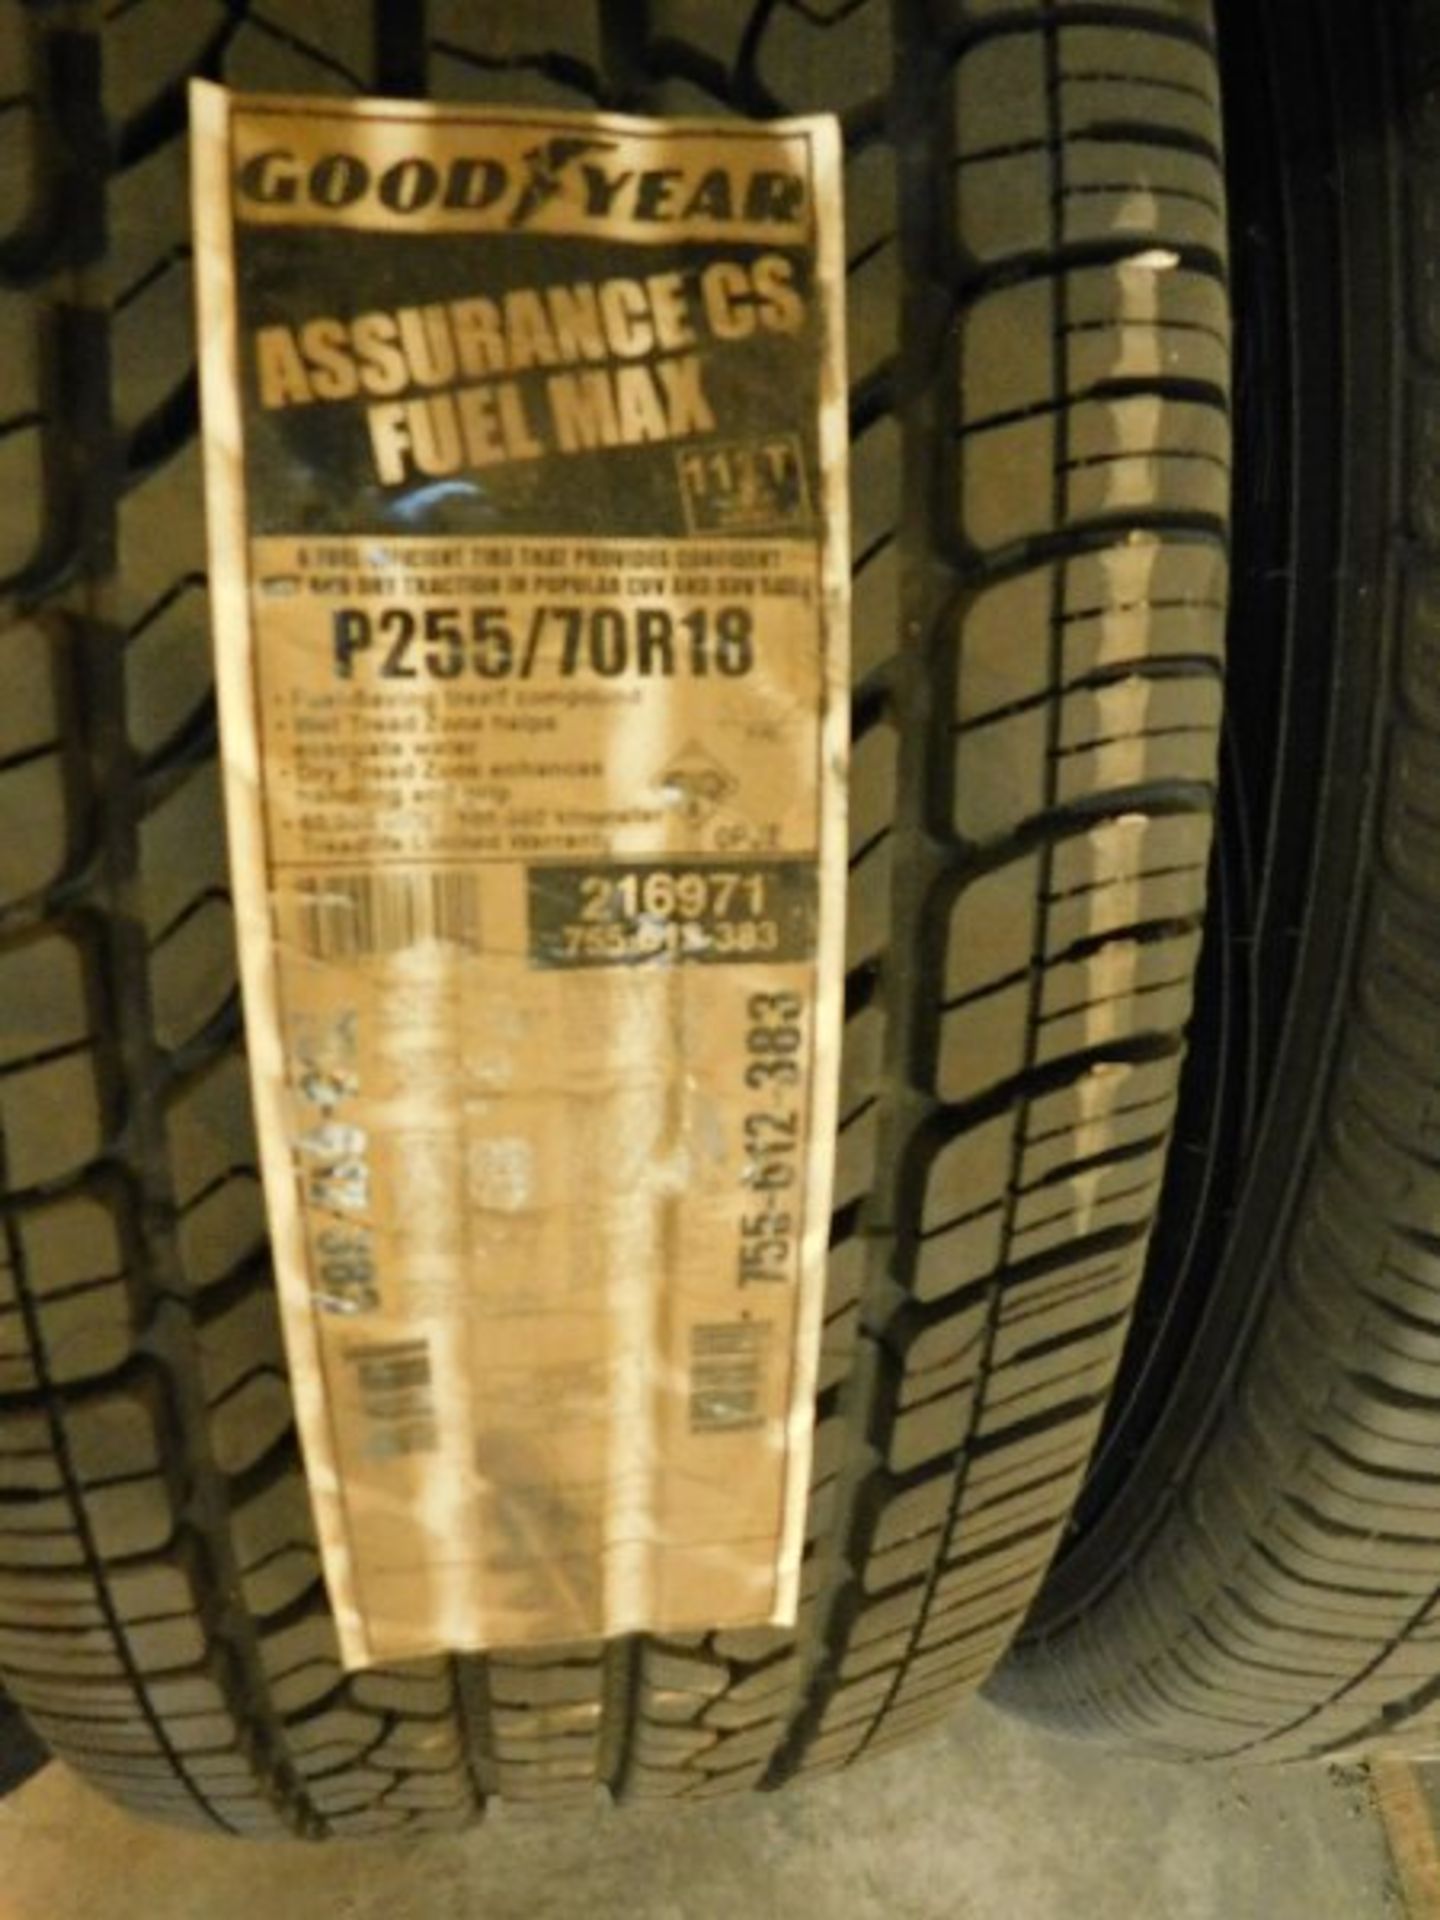 (4) Goodyear Assurance CS Fuelmax Tires, 112T, #P255/70R18 (TAXABLE) - Image 2 of 2